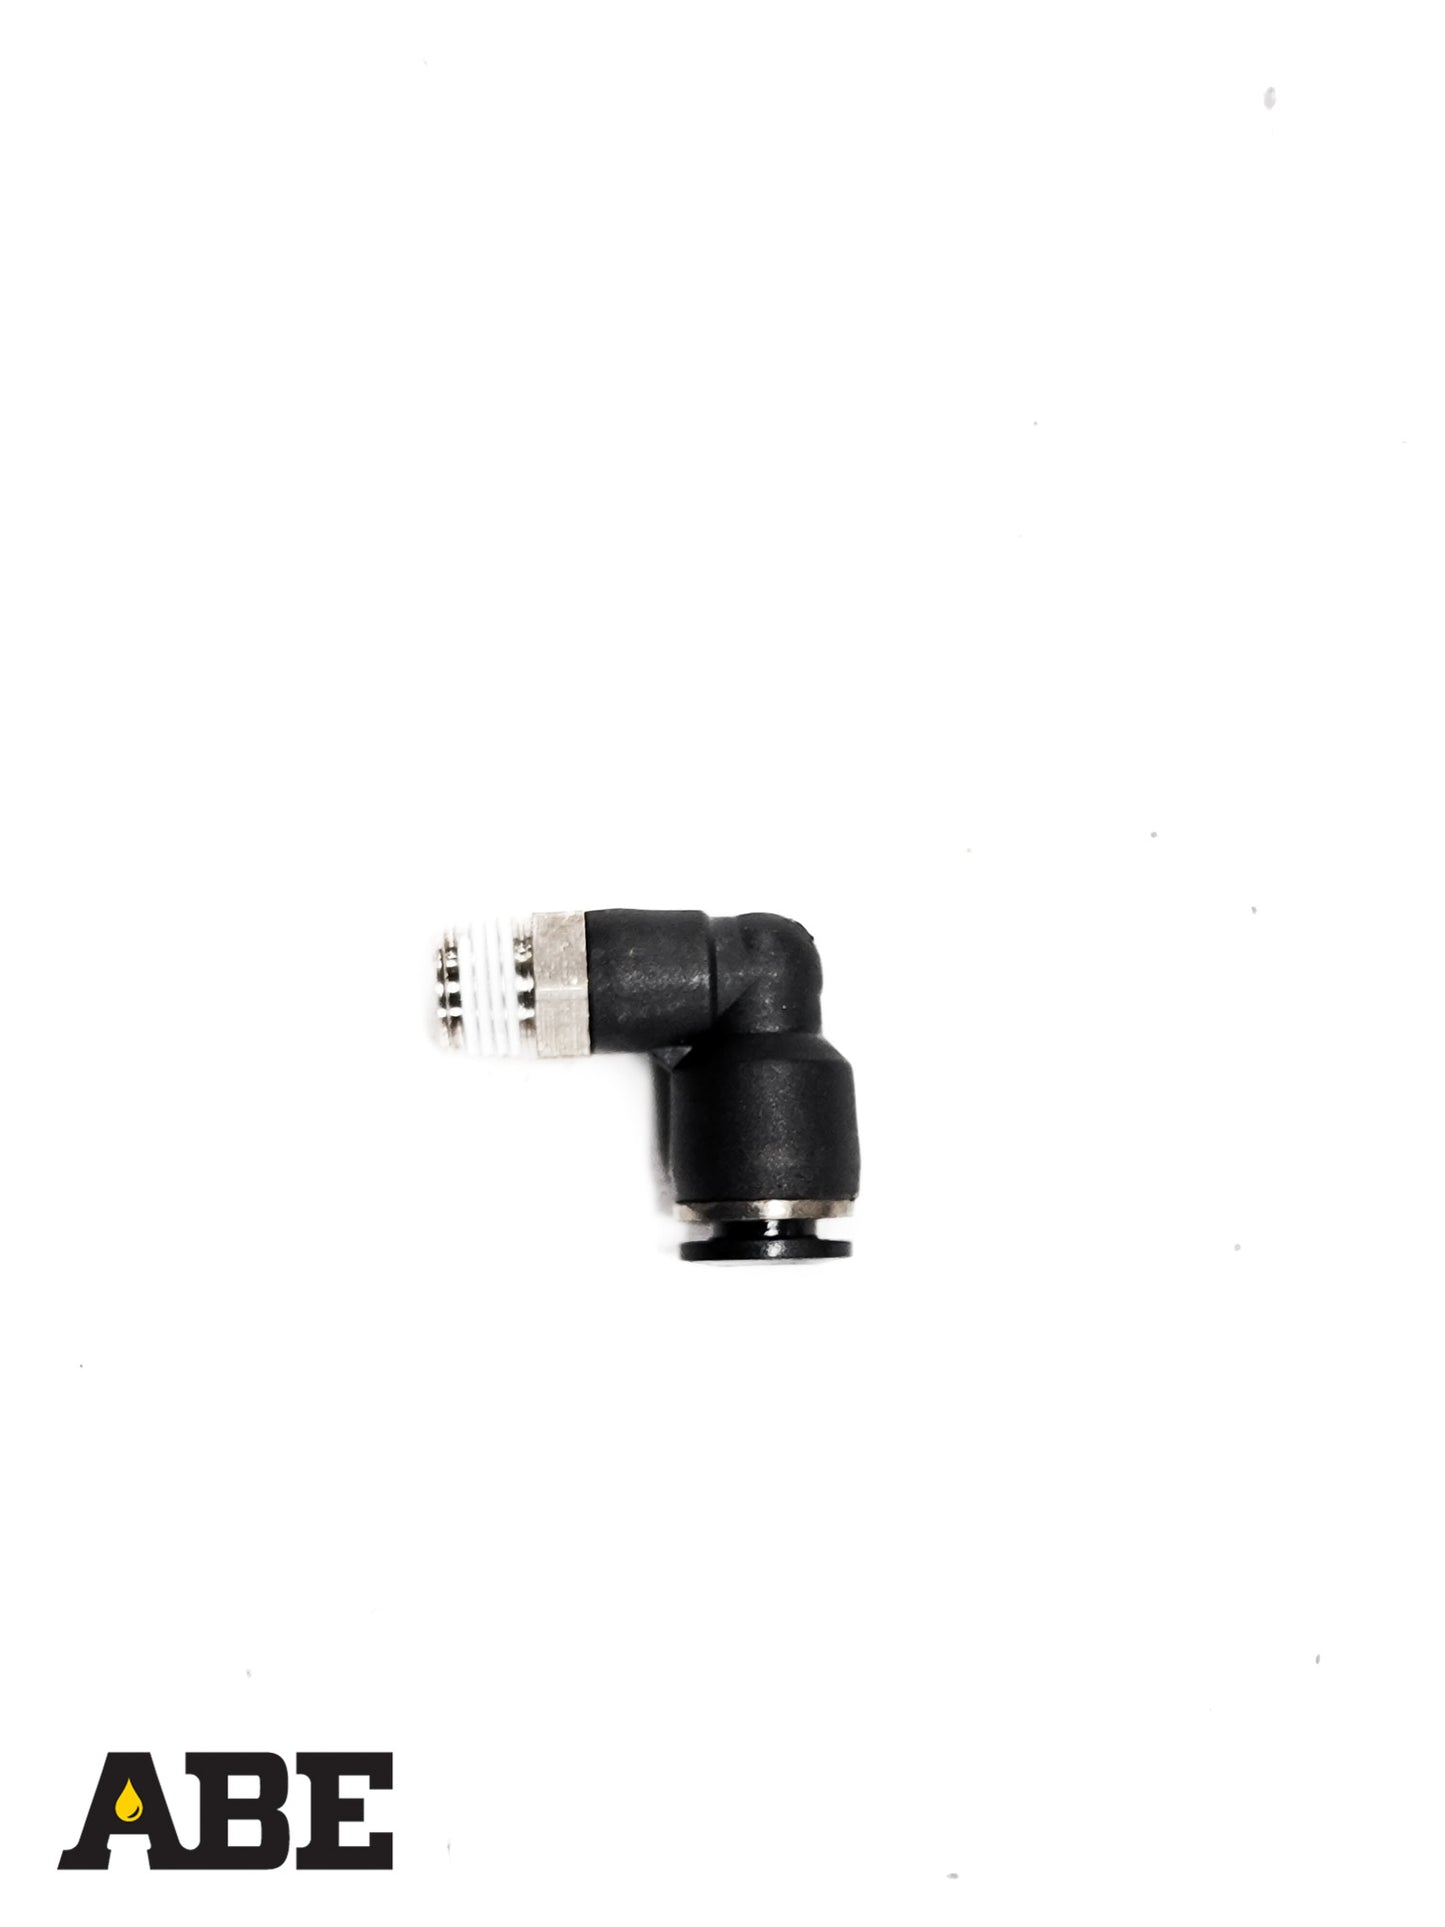 1/8" BSPT x 6mm Push-To-Connect 90° Adapter